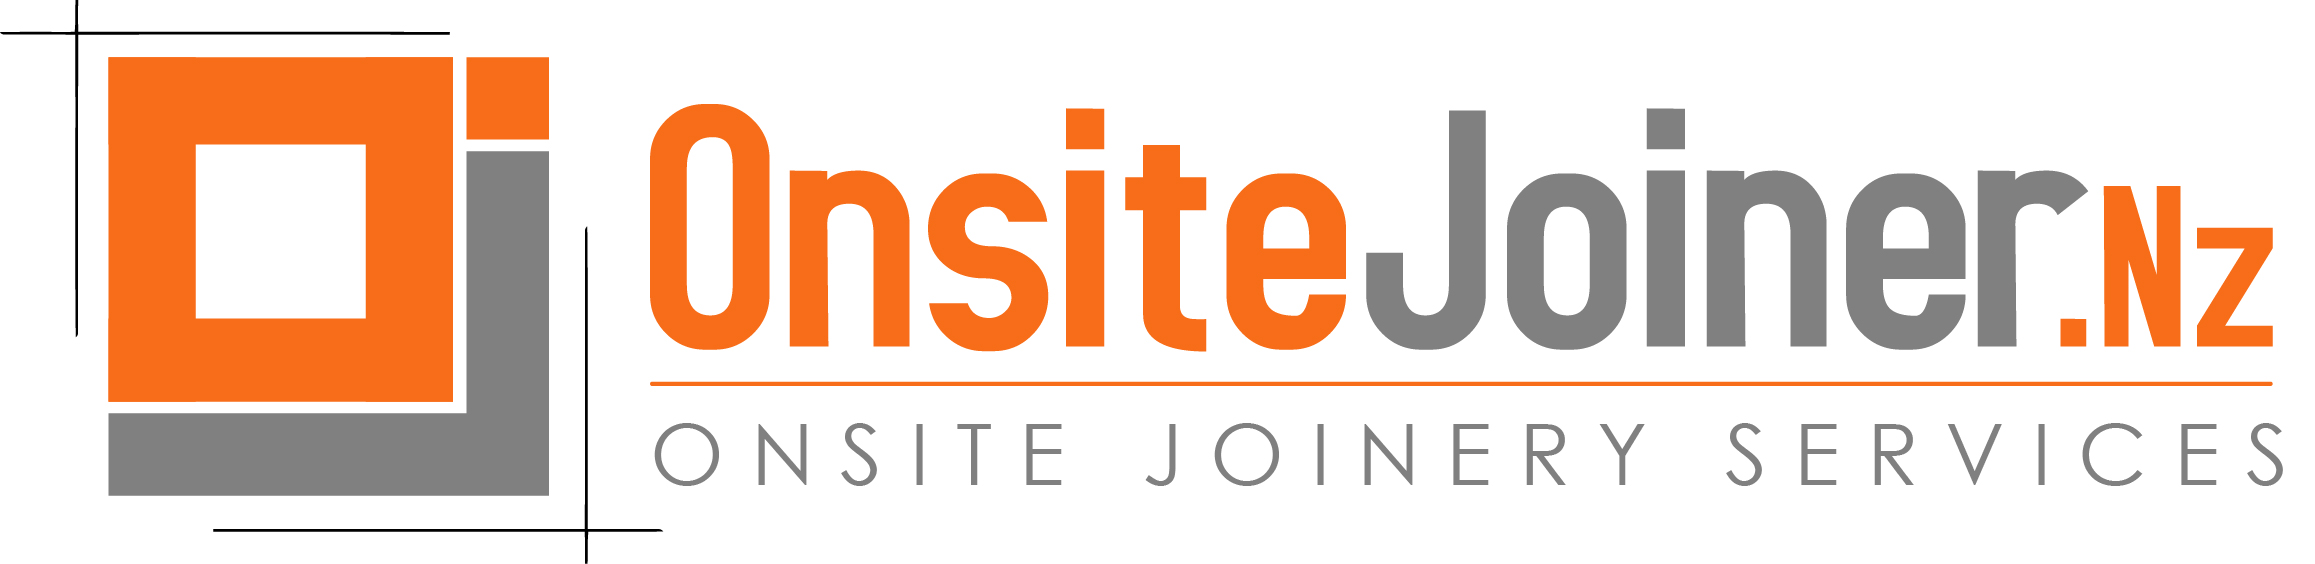 Onsite Joinery Services - Onsite Joiner